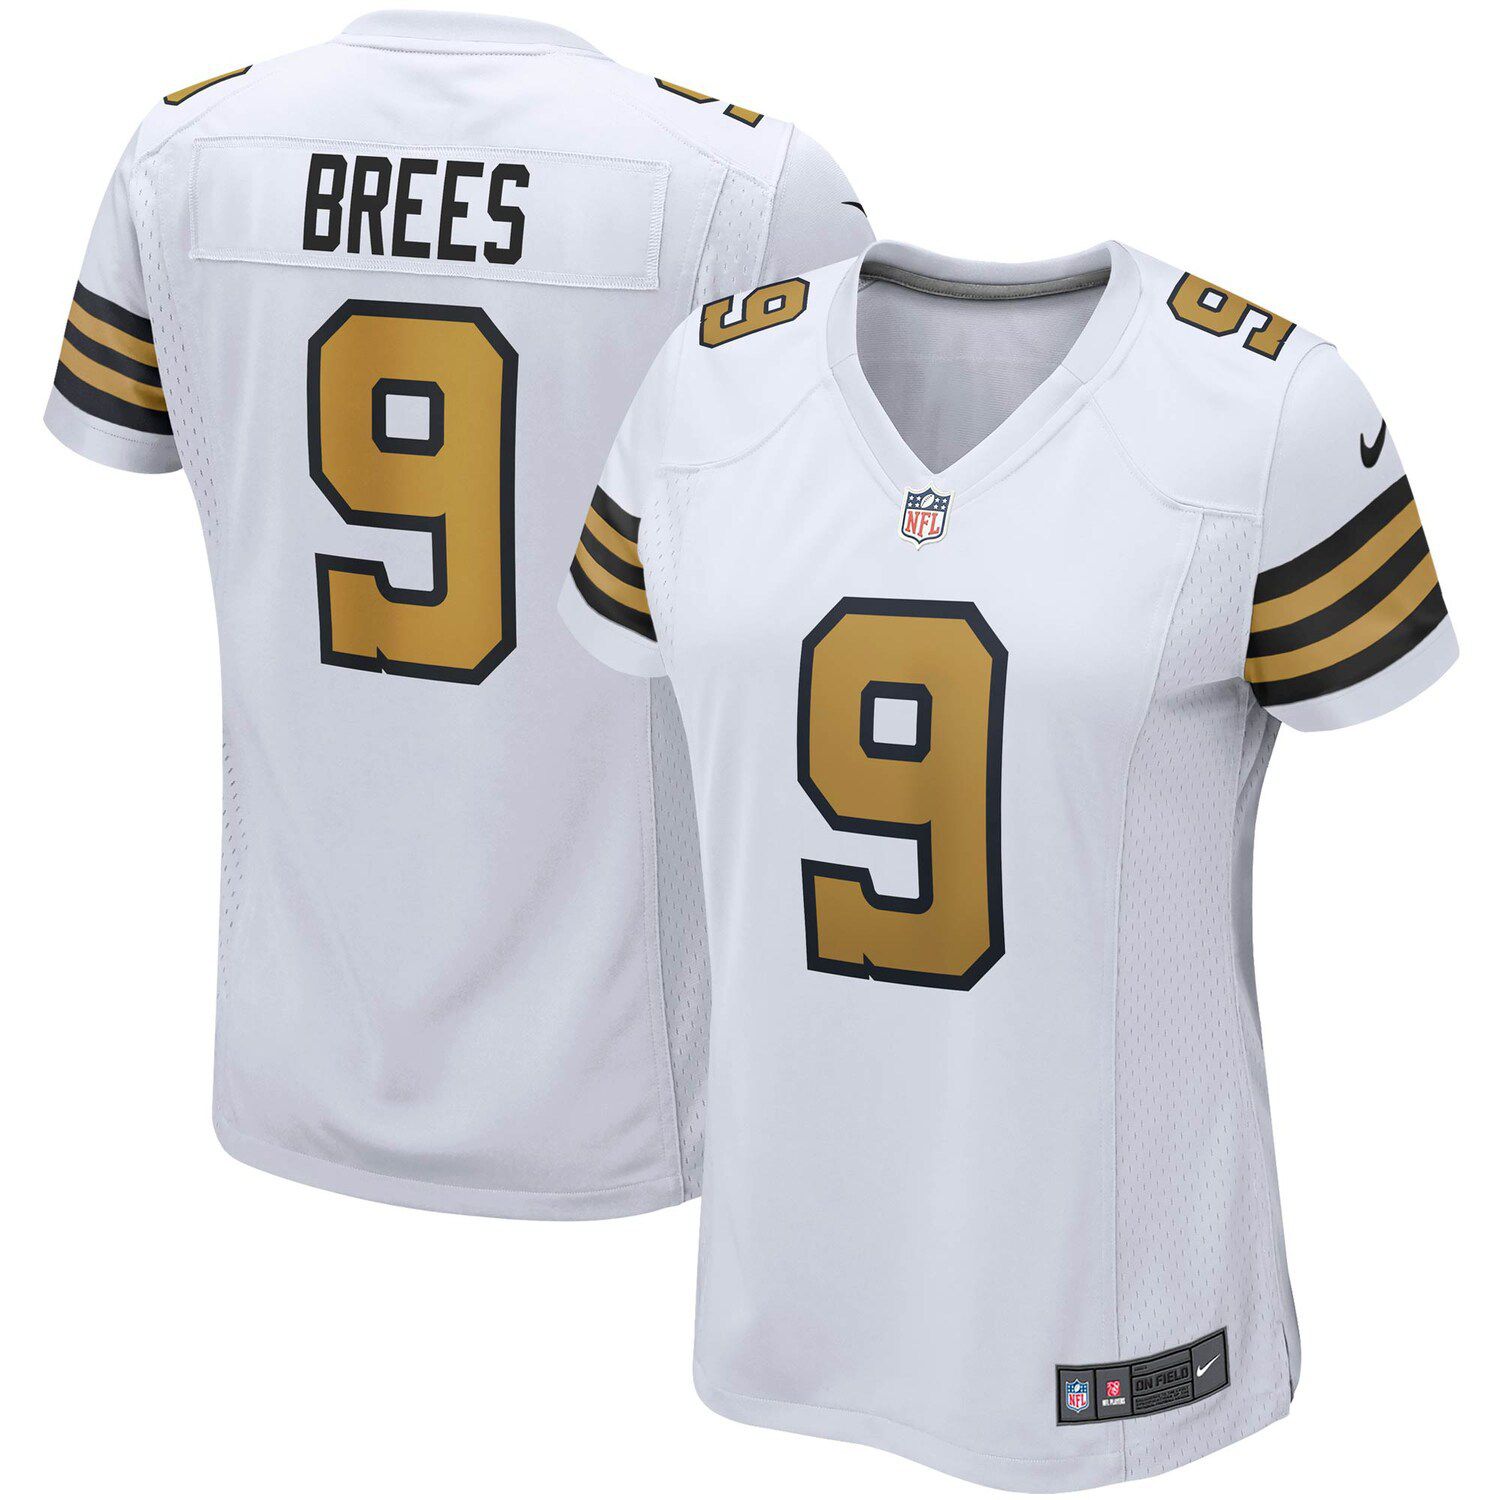 drew brees game jersey